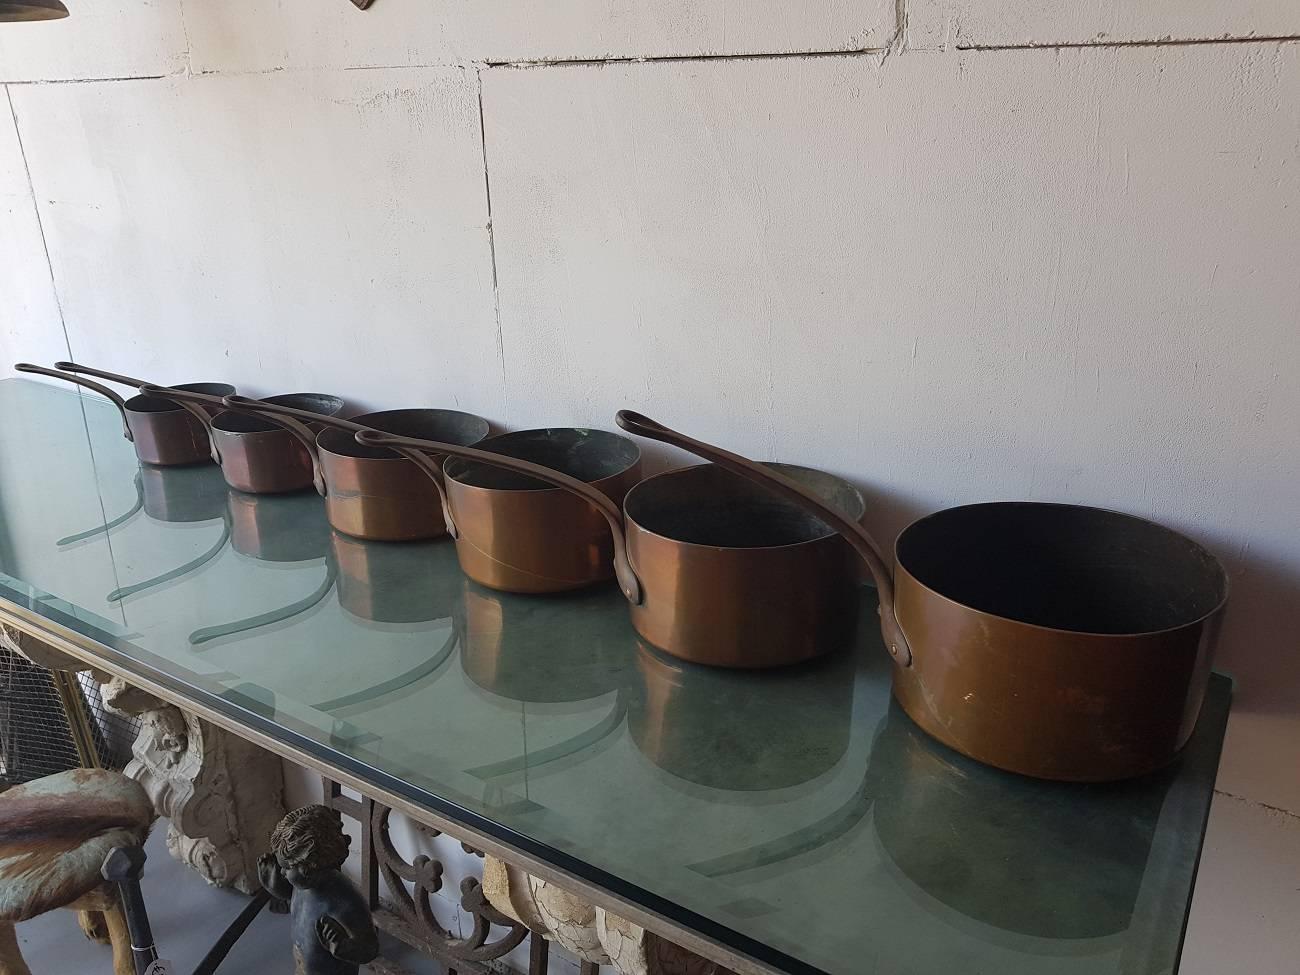 For sale at the antique company: Old and heavy six-part French copper cookware with tinned inside and metal handles, from circa 1900.

The measurements are,
Depth 15 cm, 17.5 cm, 20.5 cm, 21.5 cm, 23, 5 cm and 25 cm/ 5.9 inch, 6.8 inch, 8 inch,